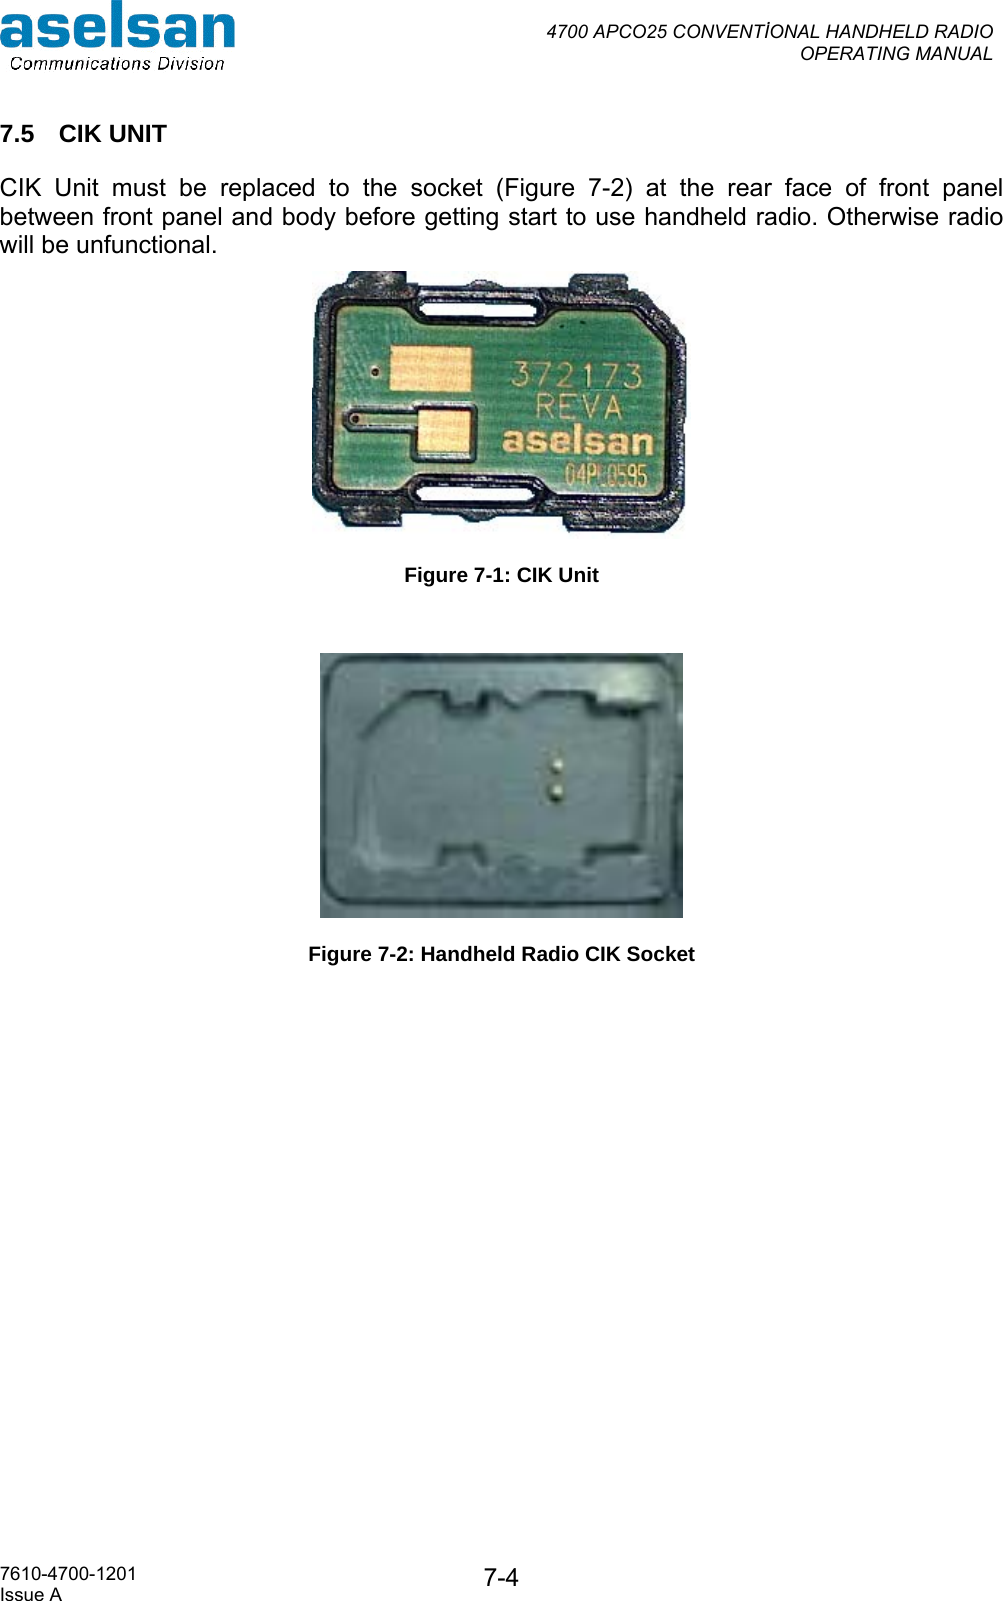  4700 APCO25 CONVENTİONAL HANDHELD RADIO  OPERATING MANUAL   7610-4700-1201 Issue A  7-47.5 CIK UNIT CIK Unit must be replaced to the socket (Figure 7-2) at the rear face of front panel between front panel and body before getting start to use handheld radio. Otherwise radio will be unfunctional.   Figure 7-1: CIK Unit   Figure 7-2: Handheld Radio CIK Socket 